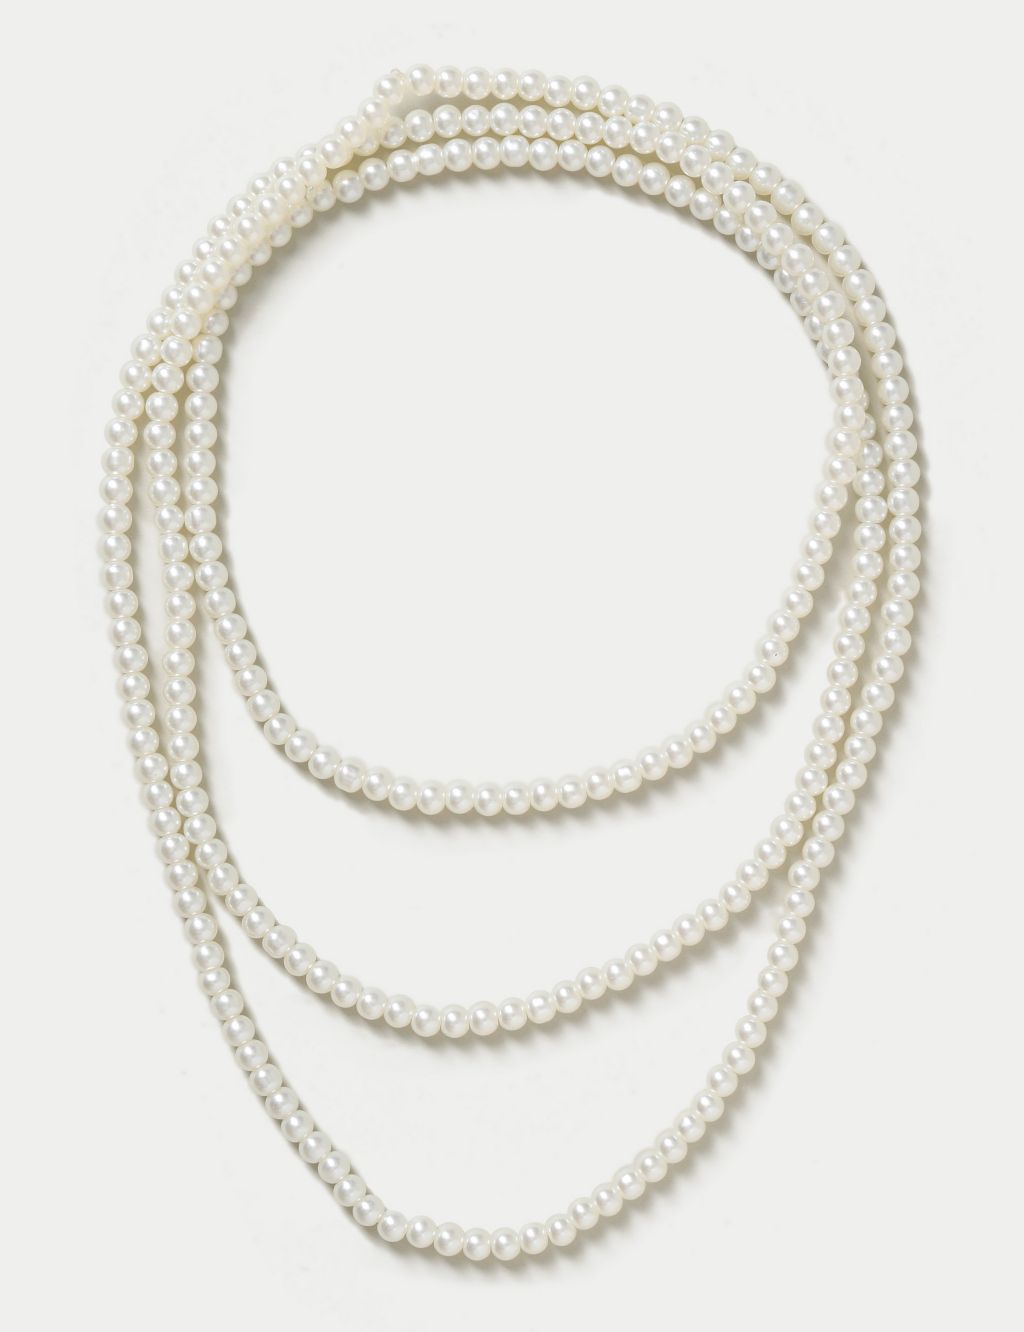 Multirow Pearl Necklace image 1